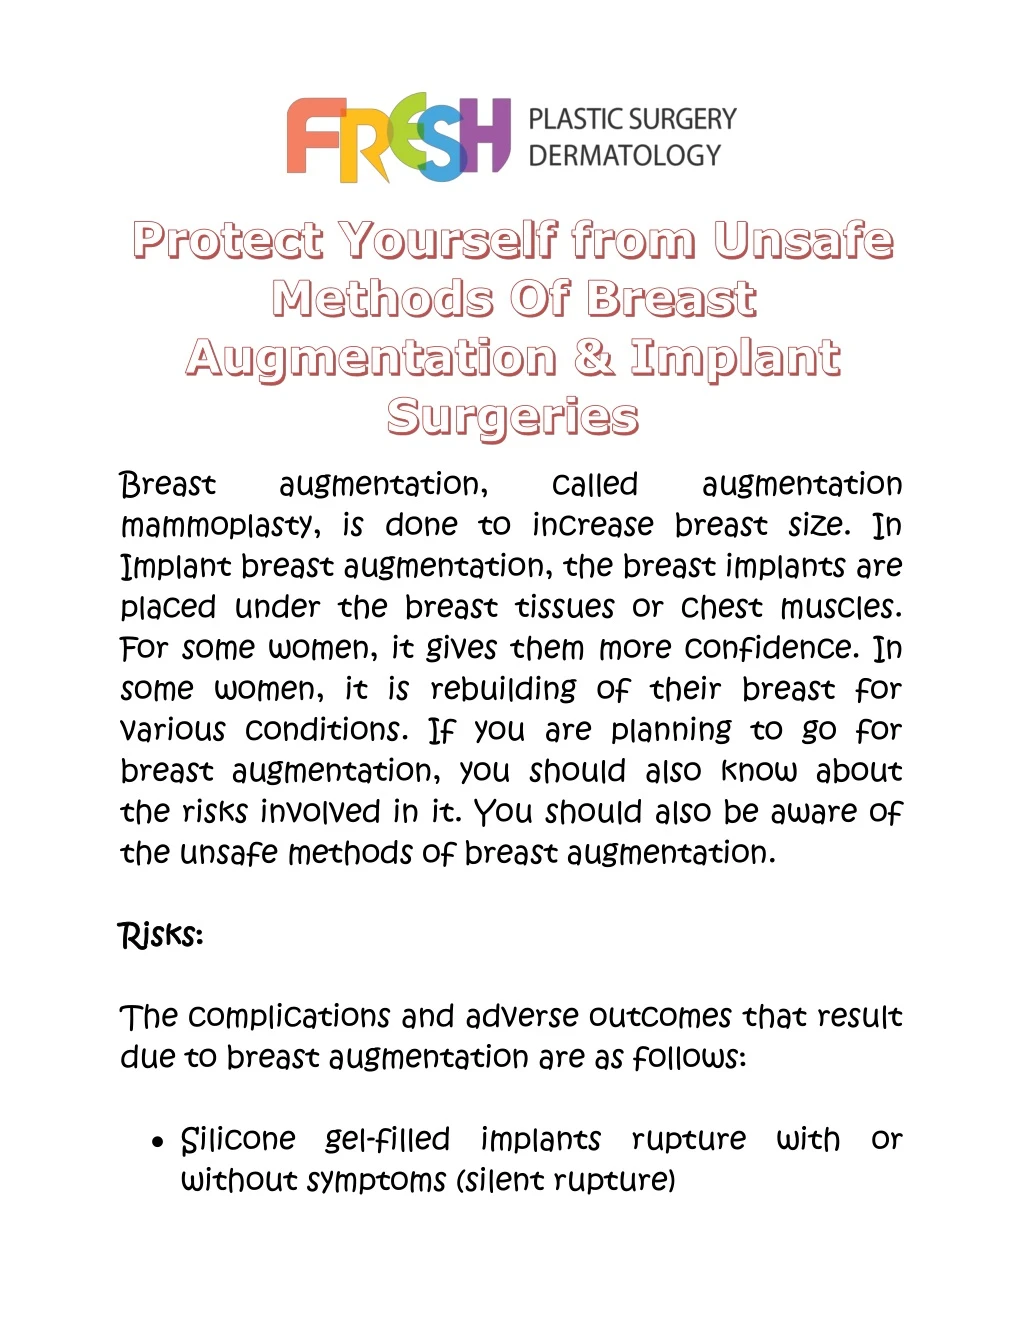 breast mammoplasty is done to increase breast